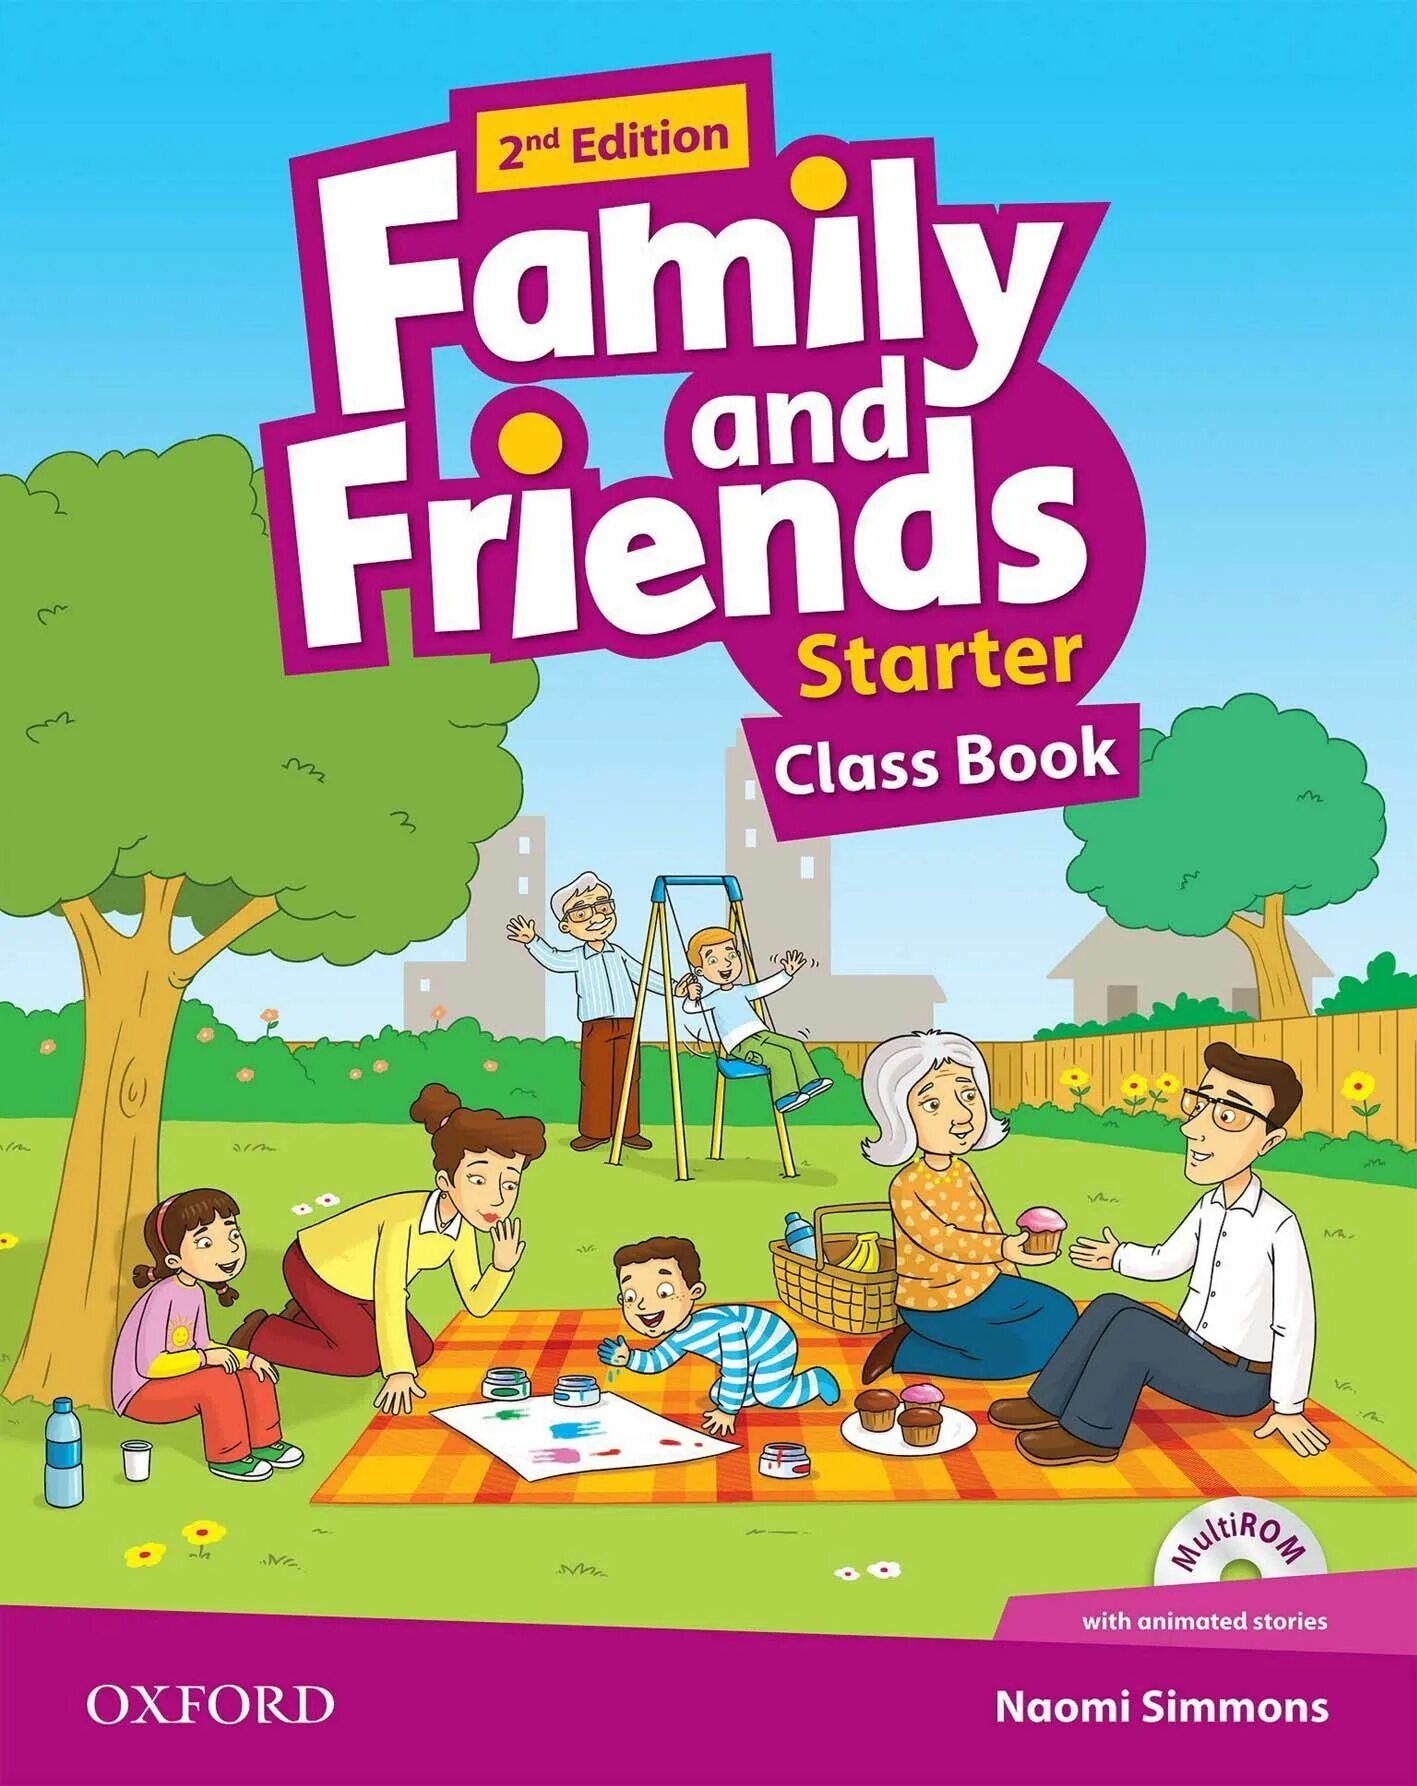 Family and friends 2 Edition Classbook. Family and friends 2 class book Starter. Учебник Oxford Family and friends 2. 2nd Edition Family and friends Starter Workbook. Family and friends students